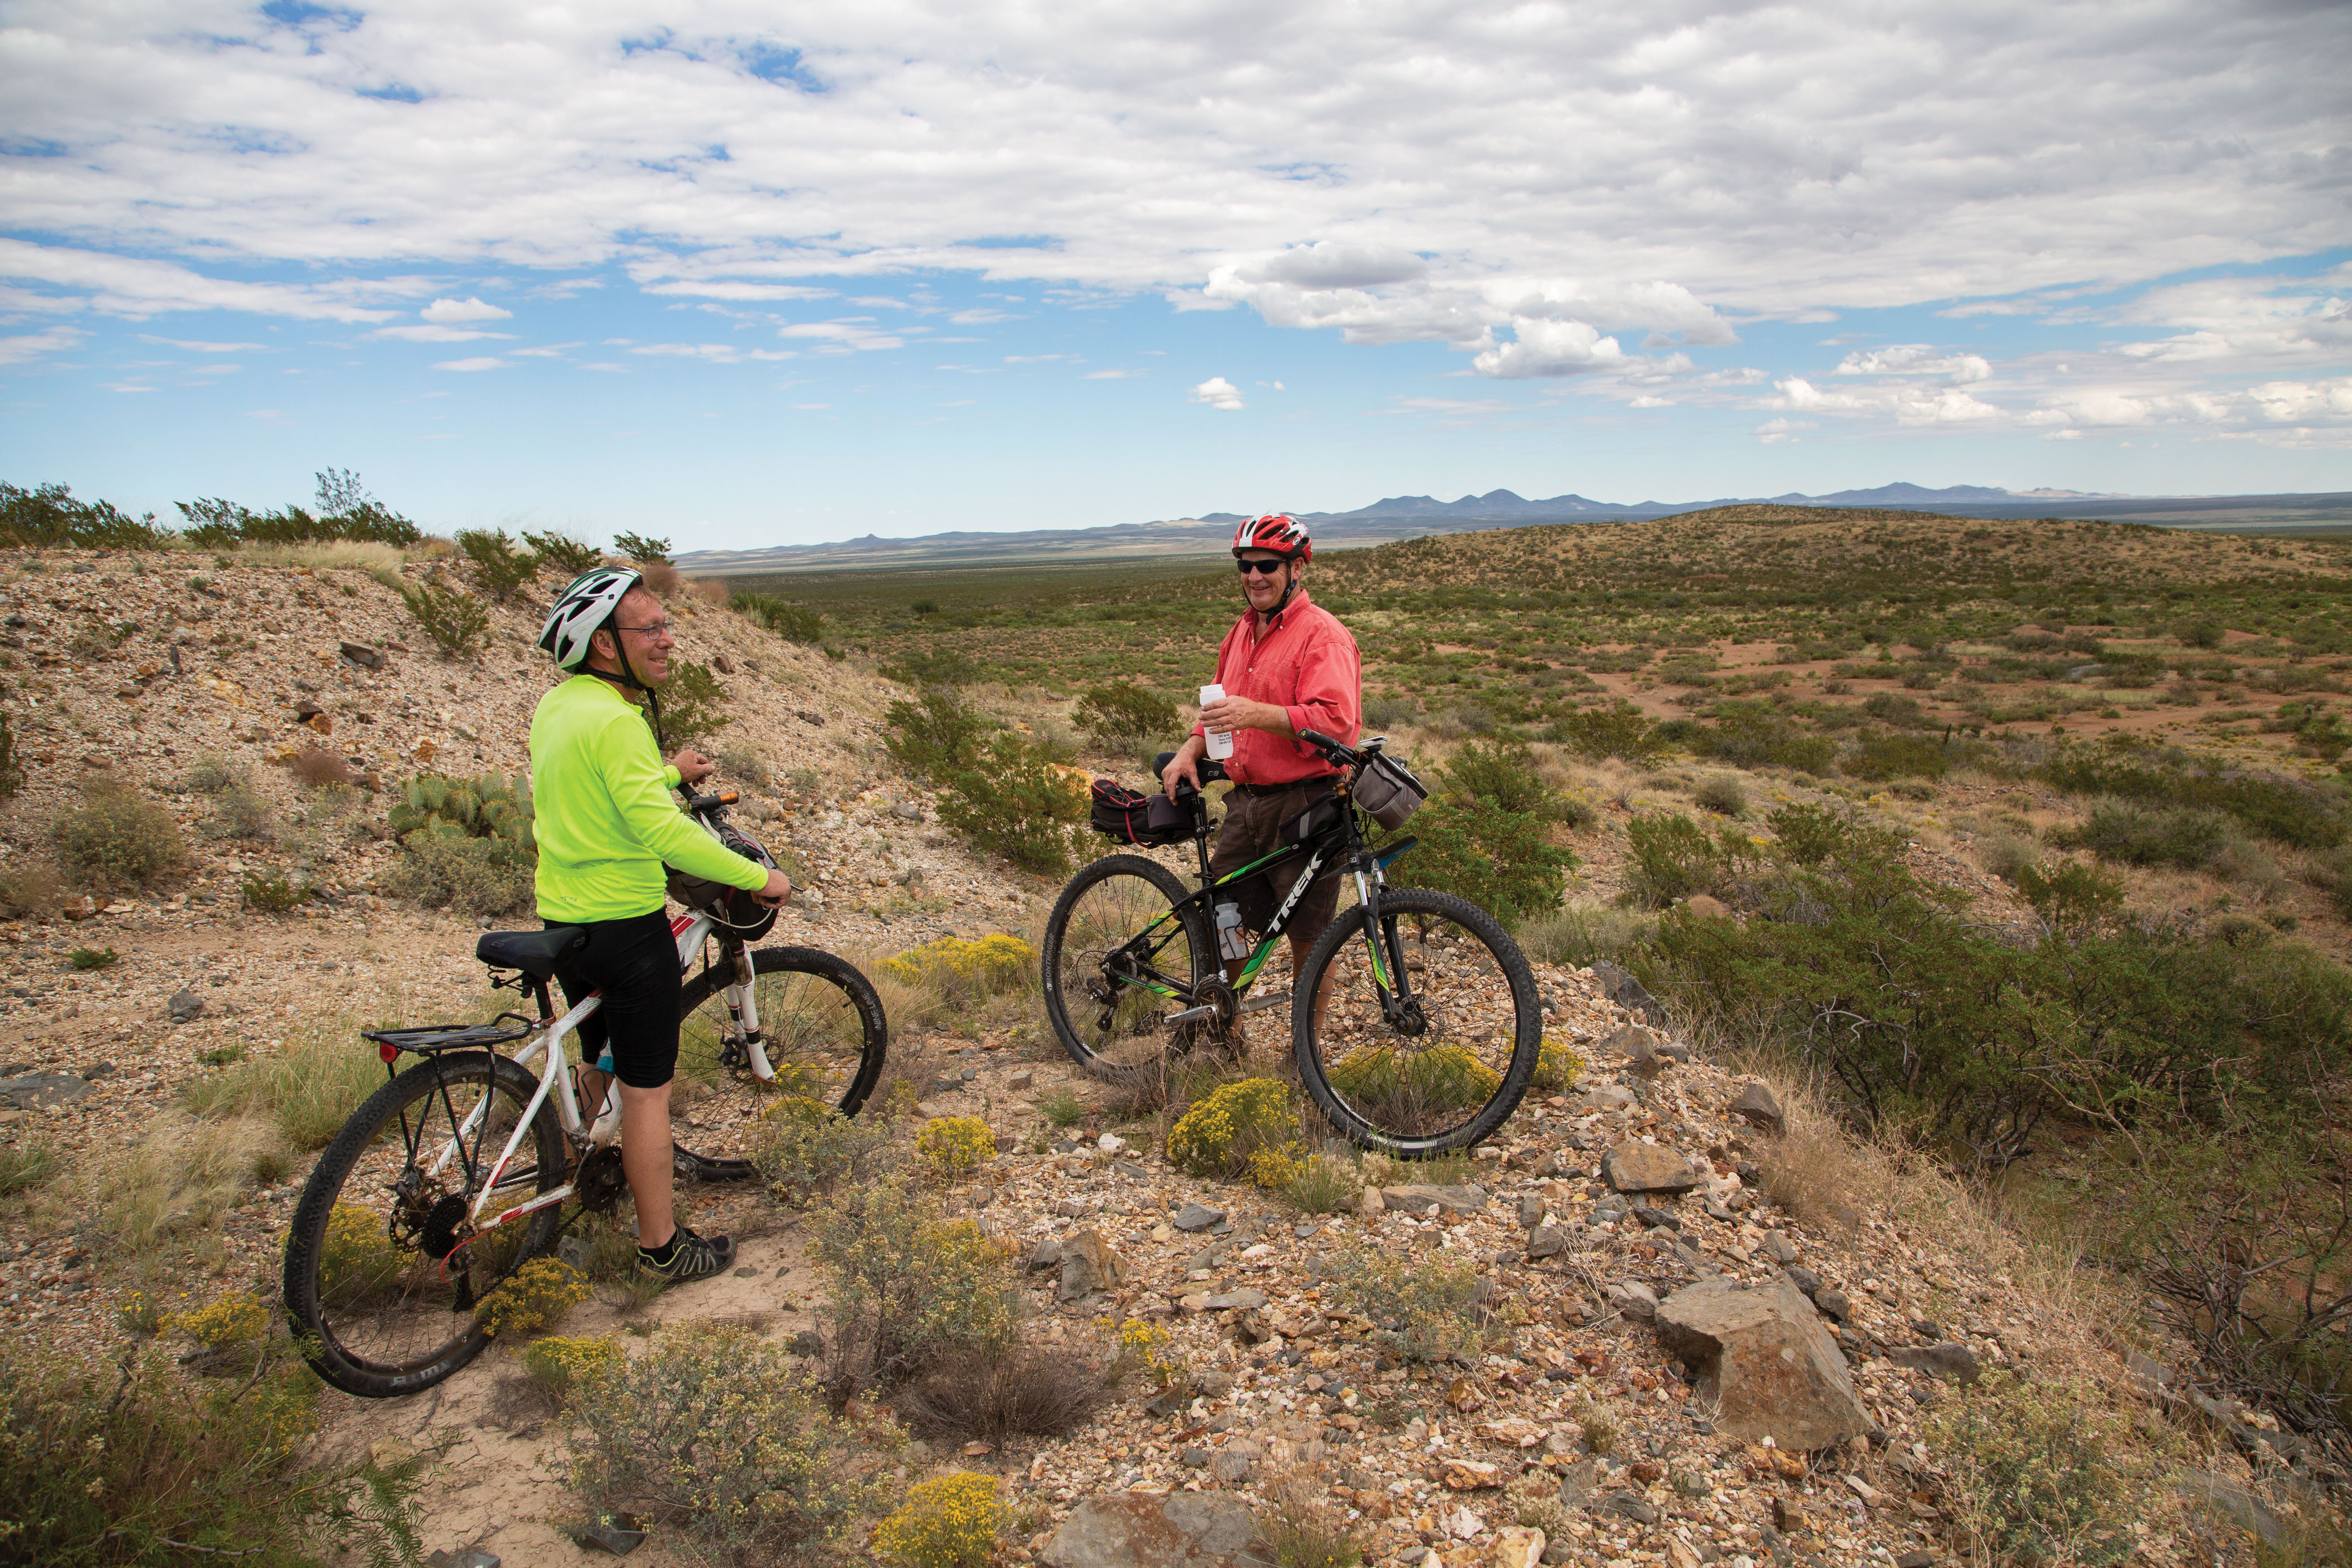 Jeff Cullum and Jeffery Sharp go on a ride on the Continental Divide Trail, near Hachita